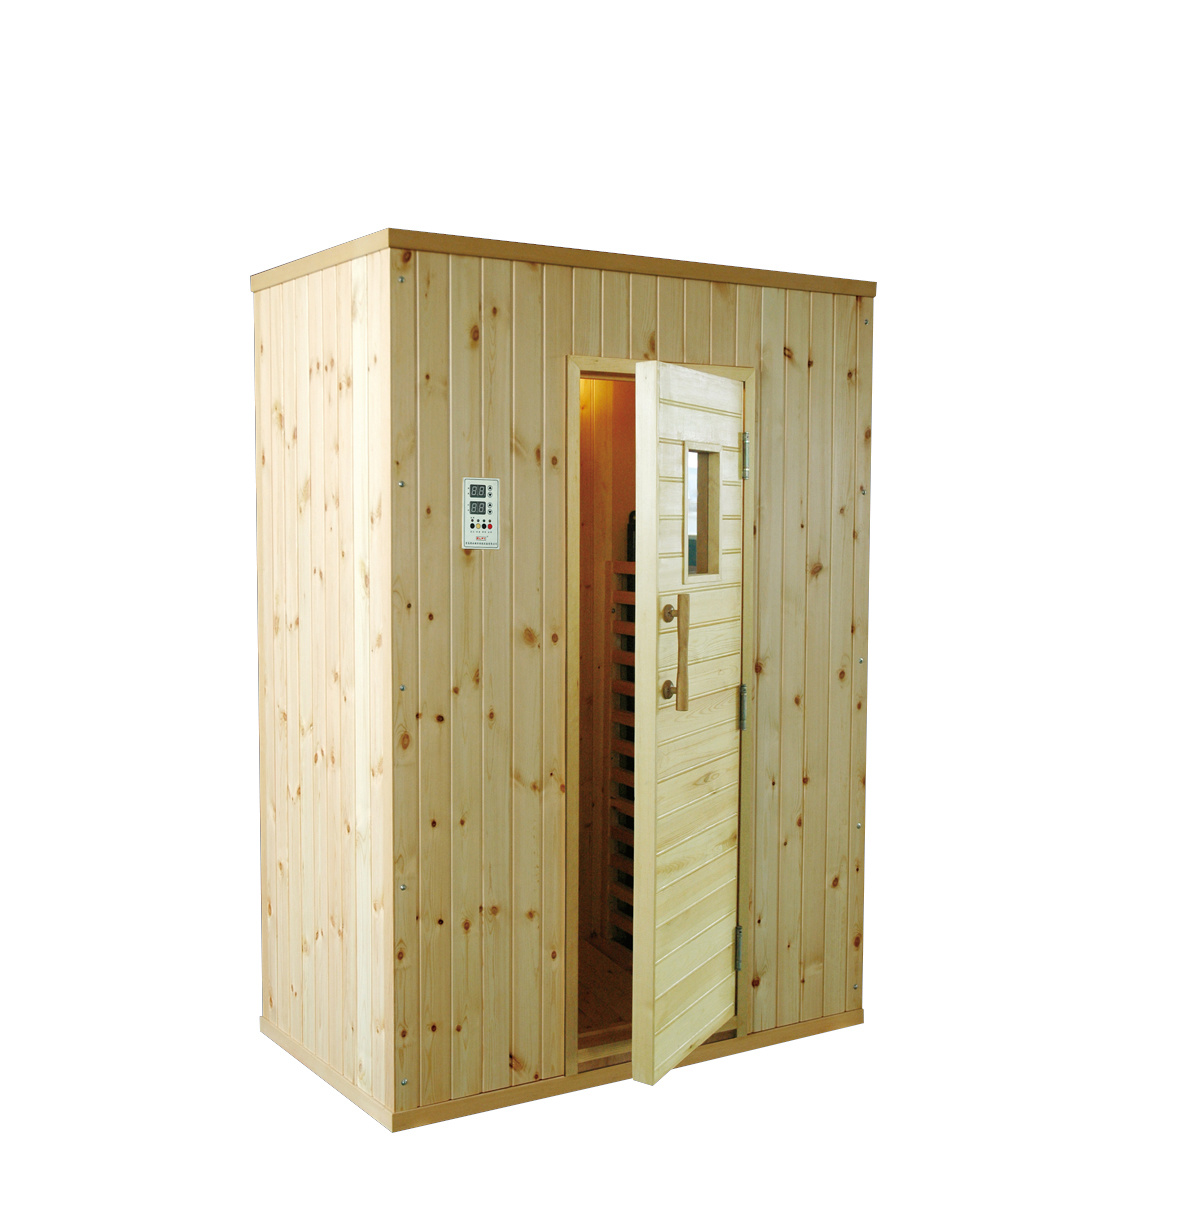 Energy-Saving Pollution-Free Safe and Reliable Far Infrared Sauna Room